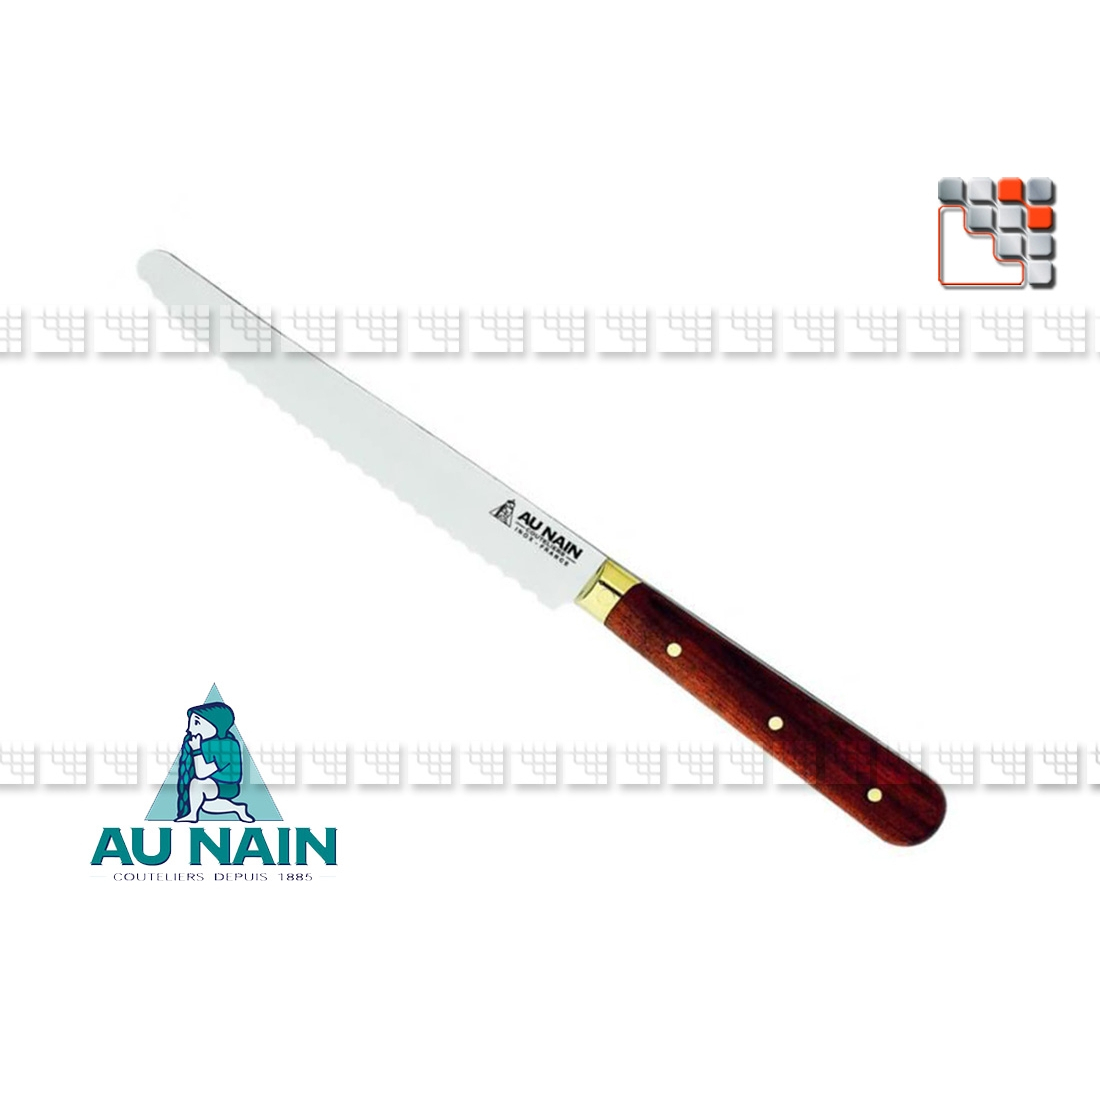 Rosewood serrated table knife AUNAIN A38-1300701 AU NAIN® Coutellerie Art of the table